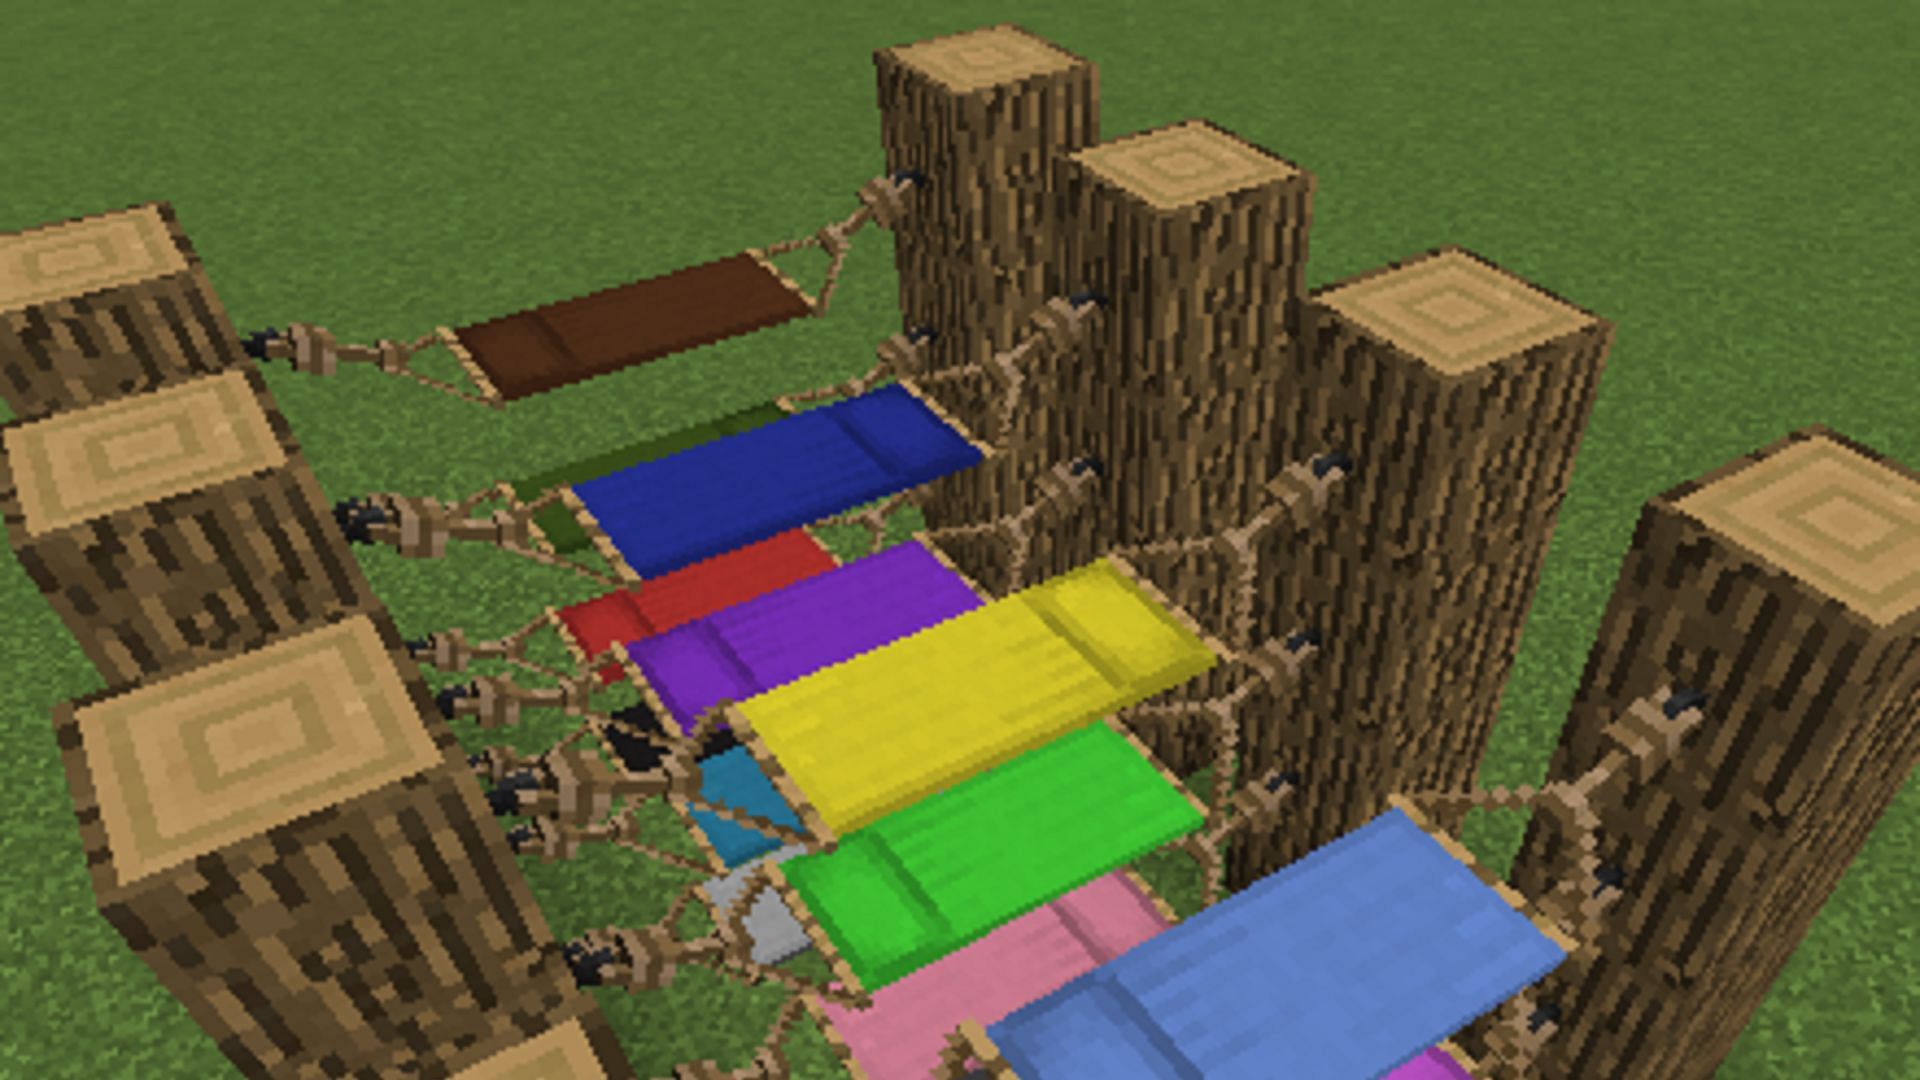 Colorful player-made hammocks made in Comforts (Image via TheillusiveC4/CurseForge)